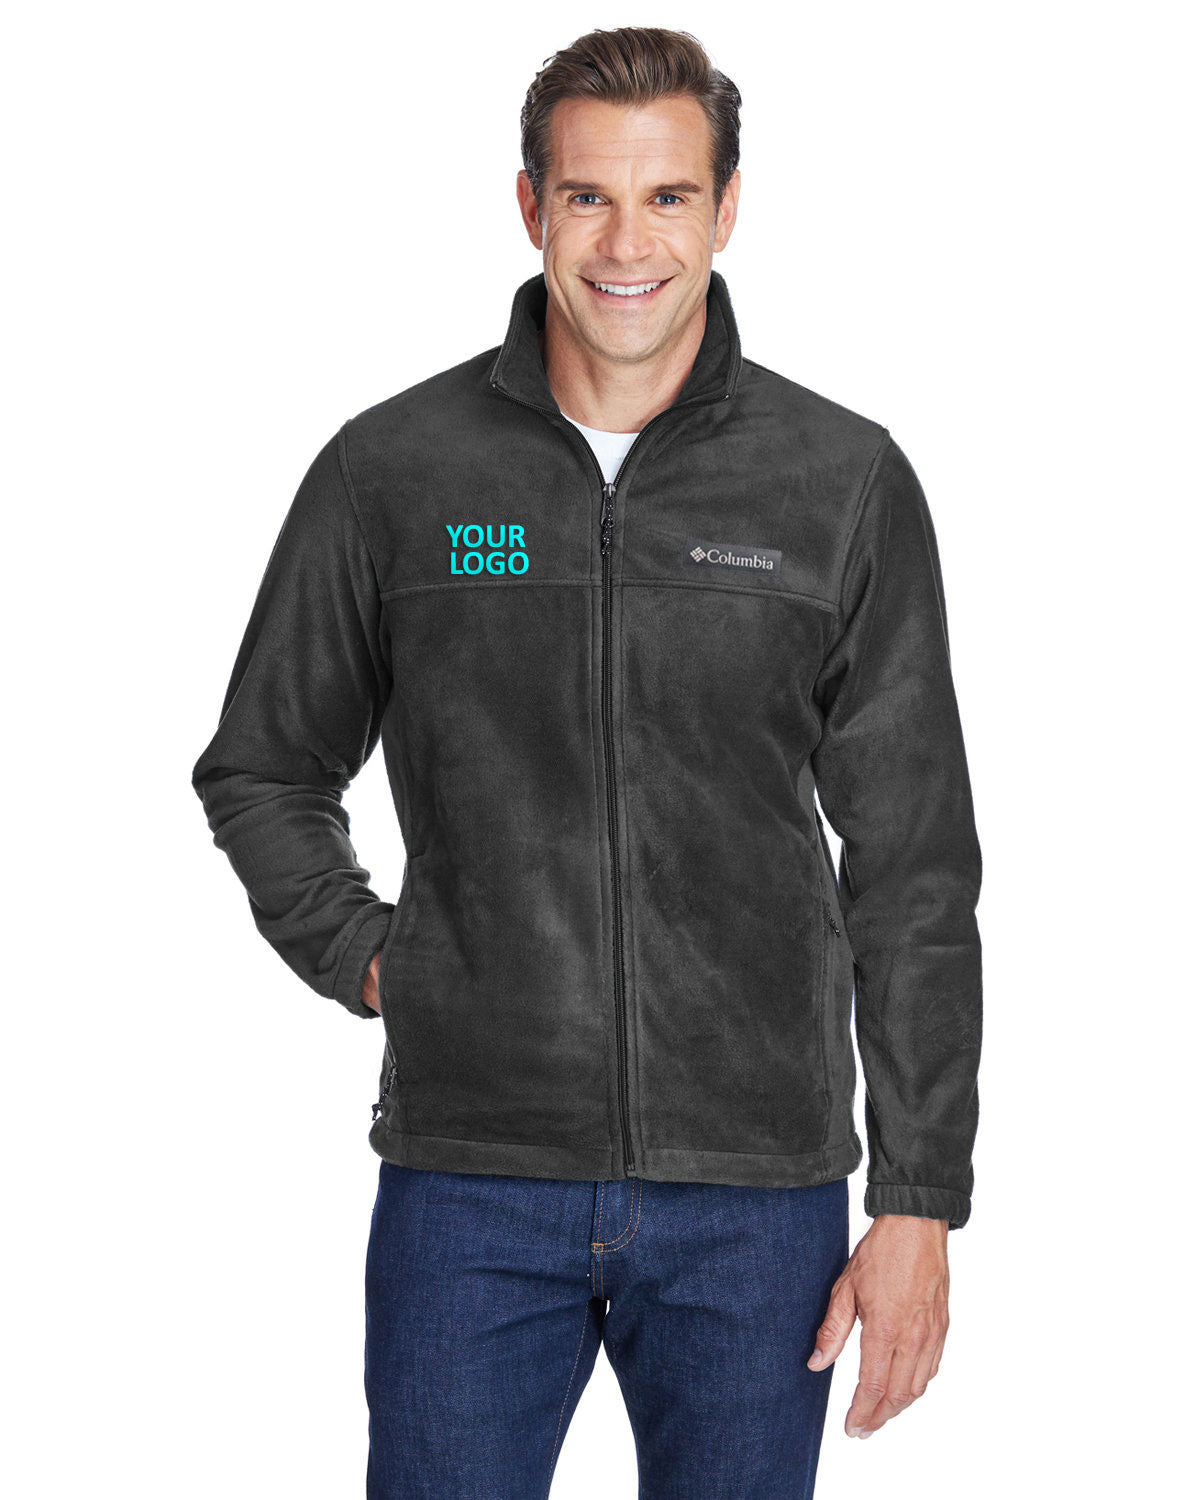 Columbia Charcoal Hthr 3220 embroidered jackets for business